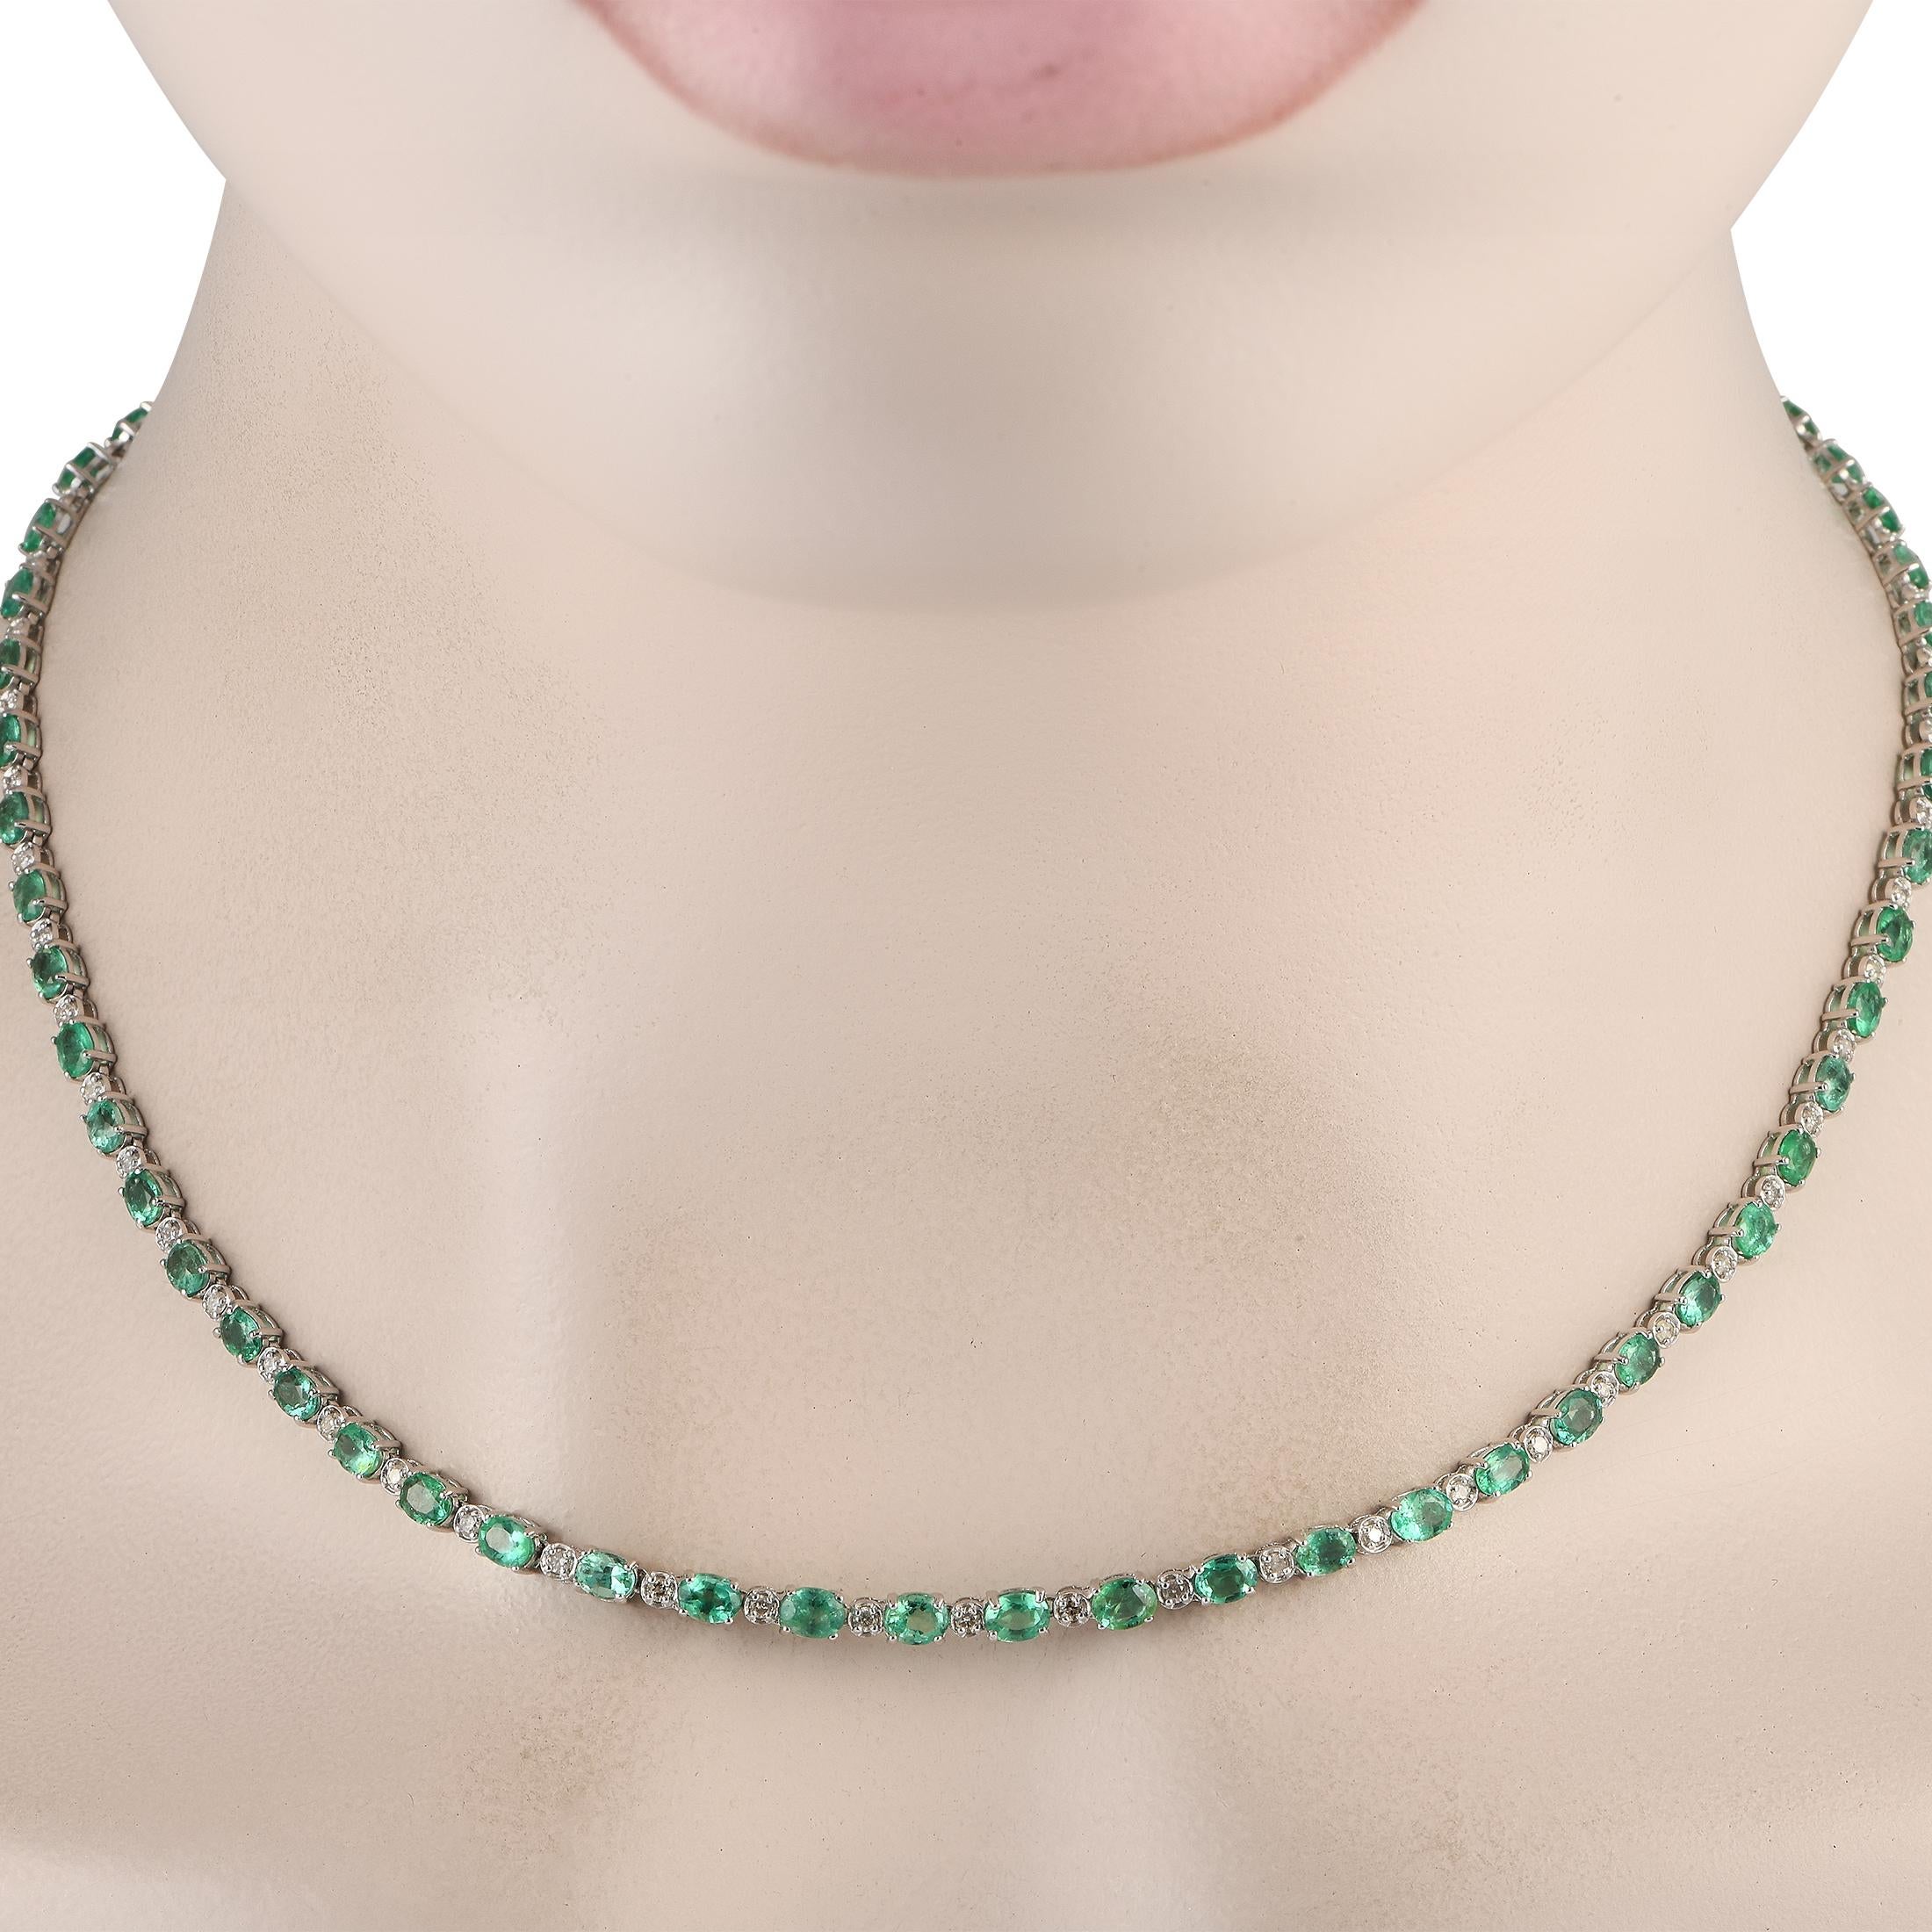 Captivating Emeralds with a total weight of 10.05 carats alternate with 0.90 carats of sparkling Diamonds on this impeccably crafted necklace. This piece measures 17 long and features a simple setting crafted from 18K White Gold.This jewelry piece